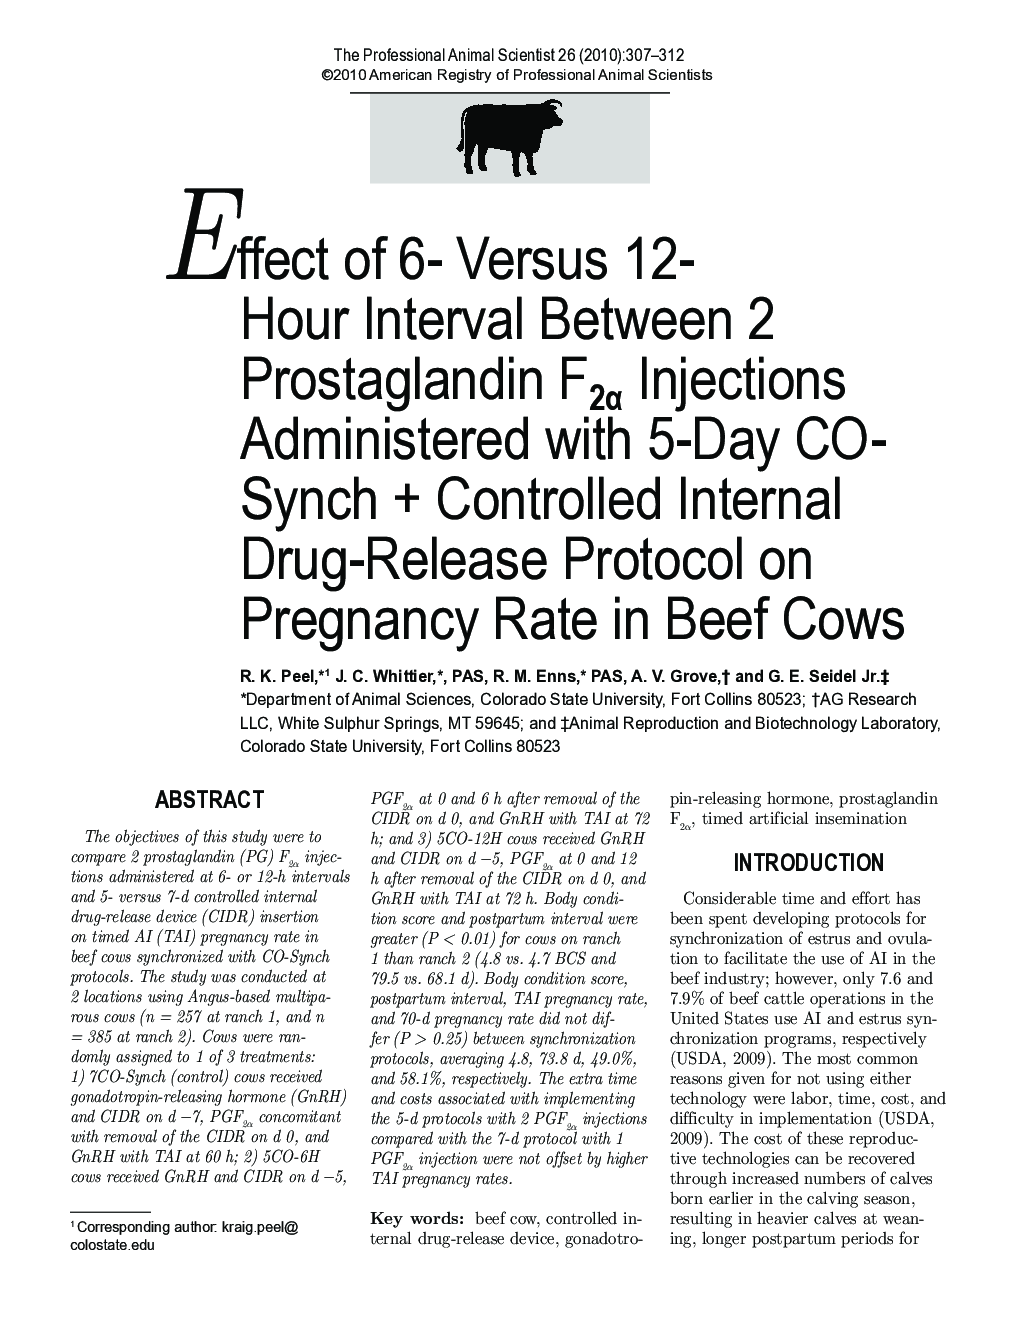 Effect of 6- Versus 12-Hour Interval Between 2 Prostaglandin F2Î± Injections Administered with 5-Day CO-SynchÂ +Â Controlled Internal Drug-Release Protocol on Pregnancy Rate in Beef Cows